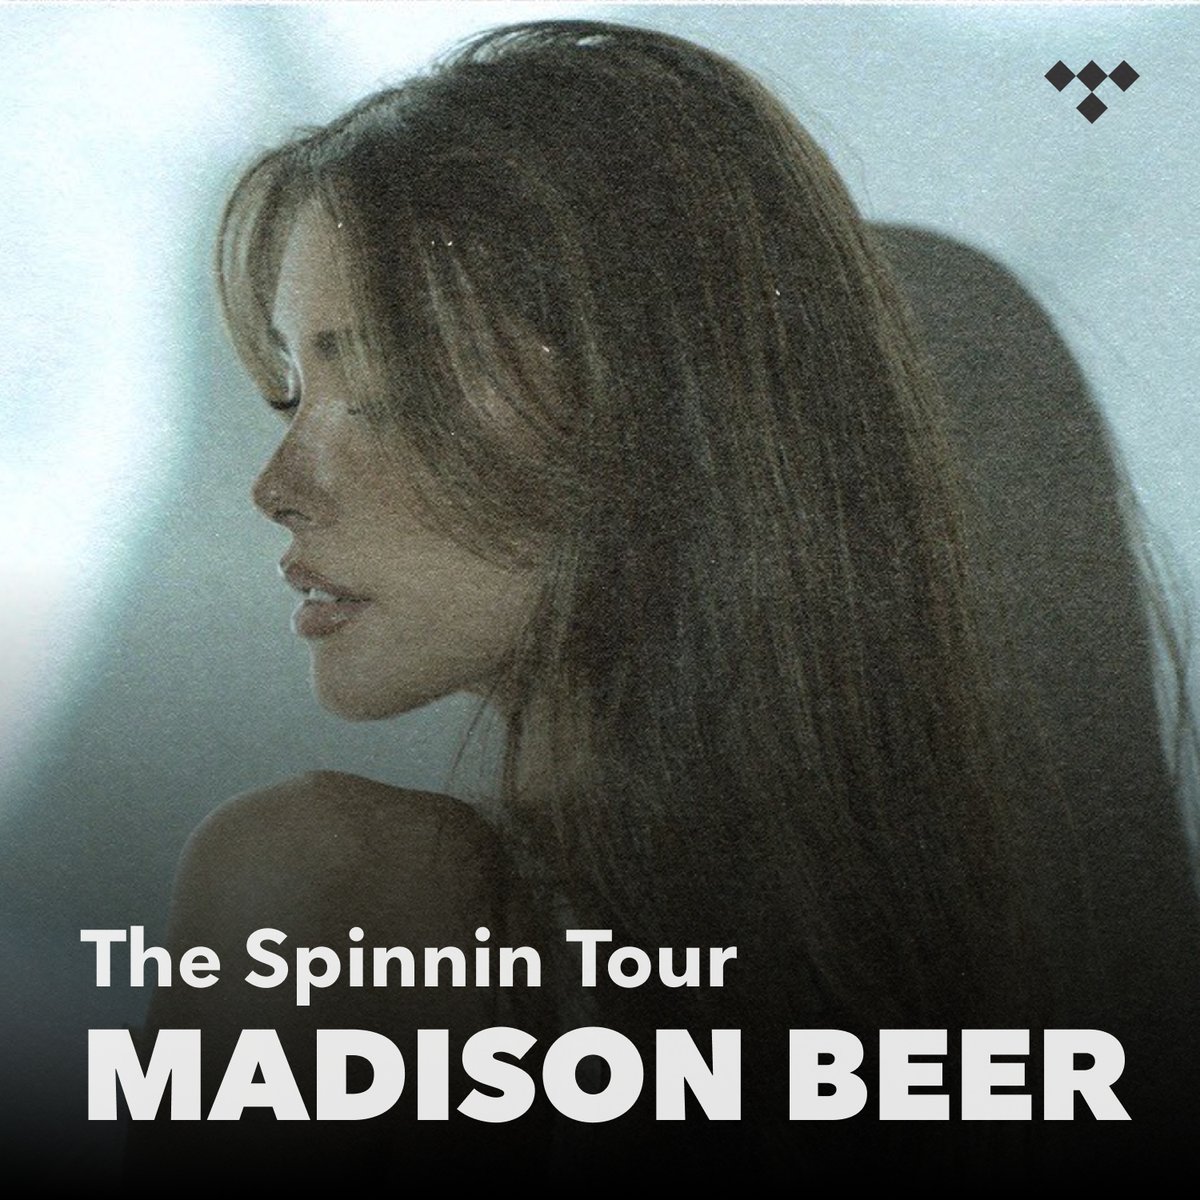 If you're lucky enough to attend @madisonbeer's 'The Spinnin Tour' (stopping in North Carolina tonight), here's her set list to get ready! tidal.link/3JSObYY